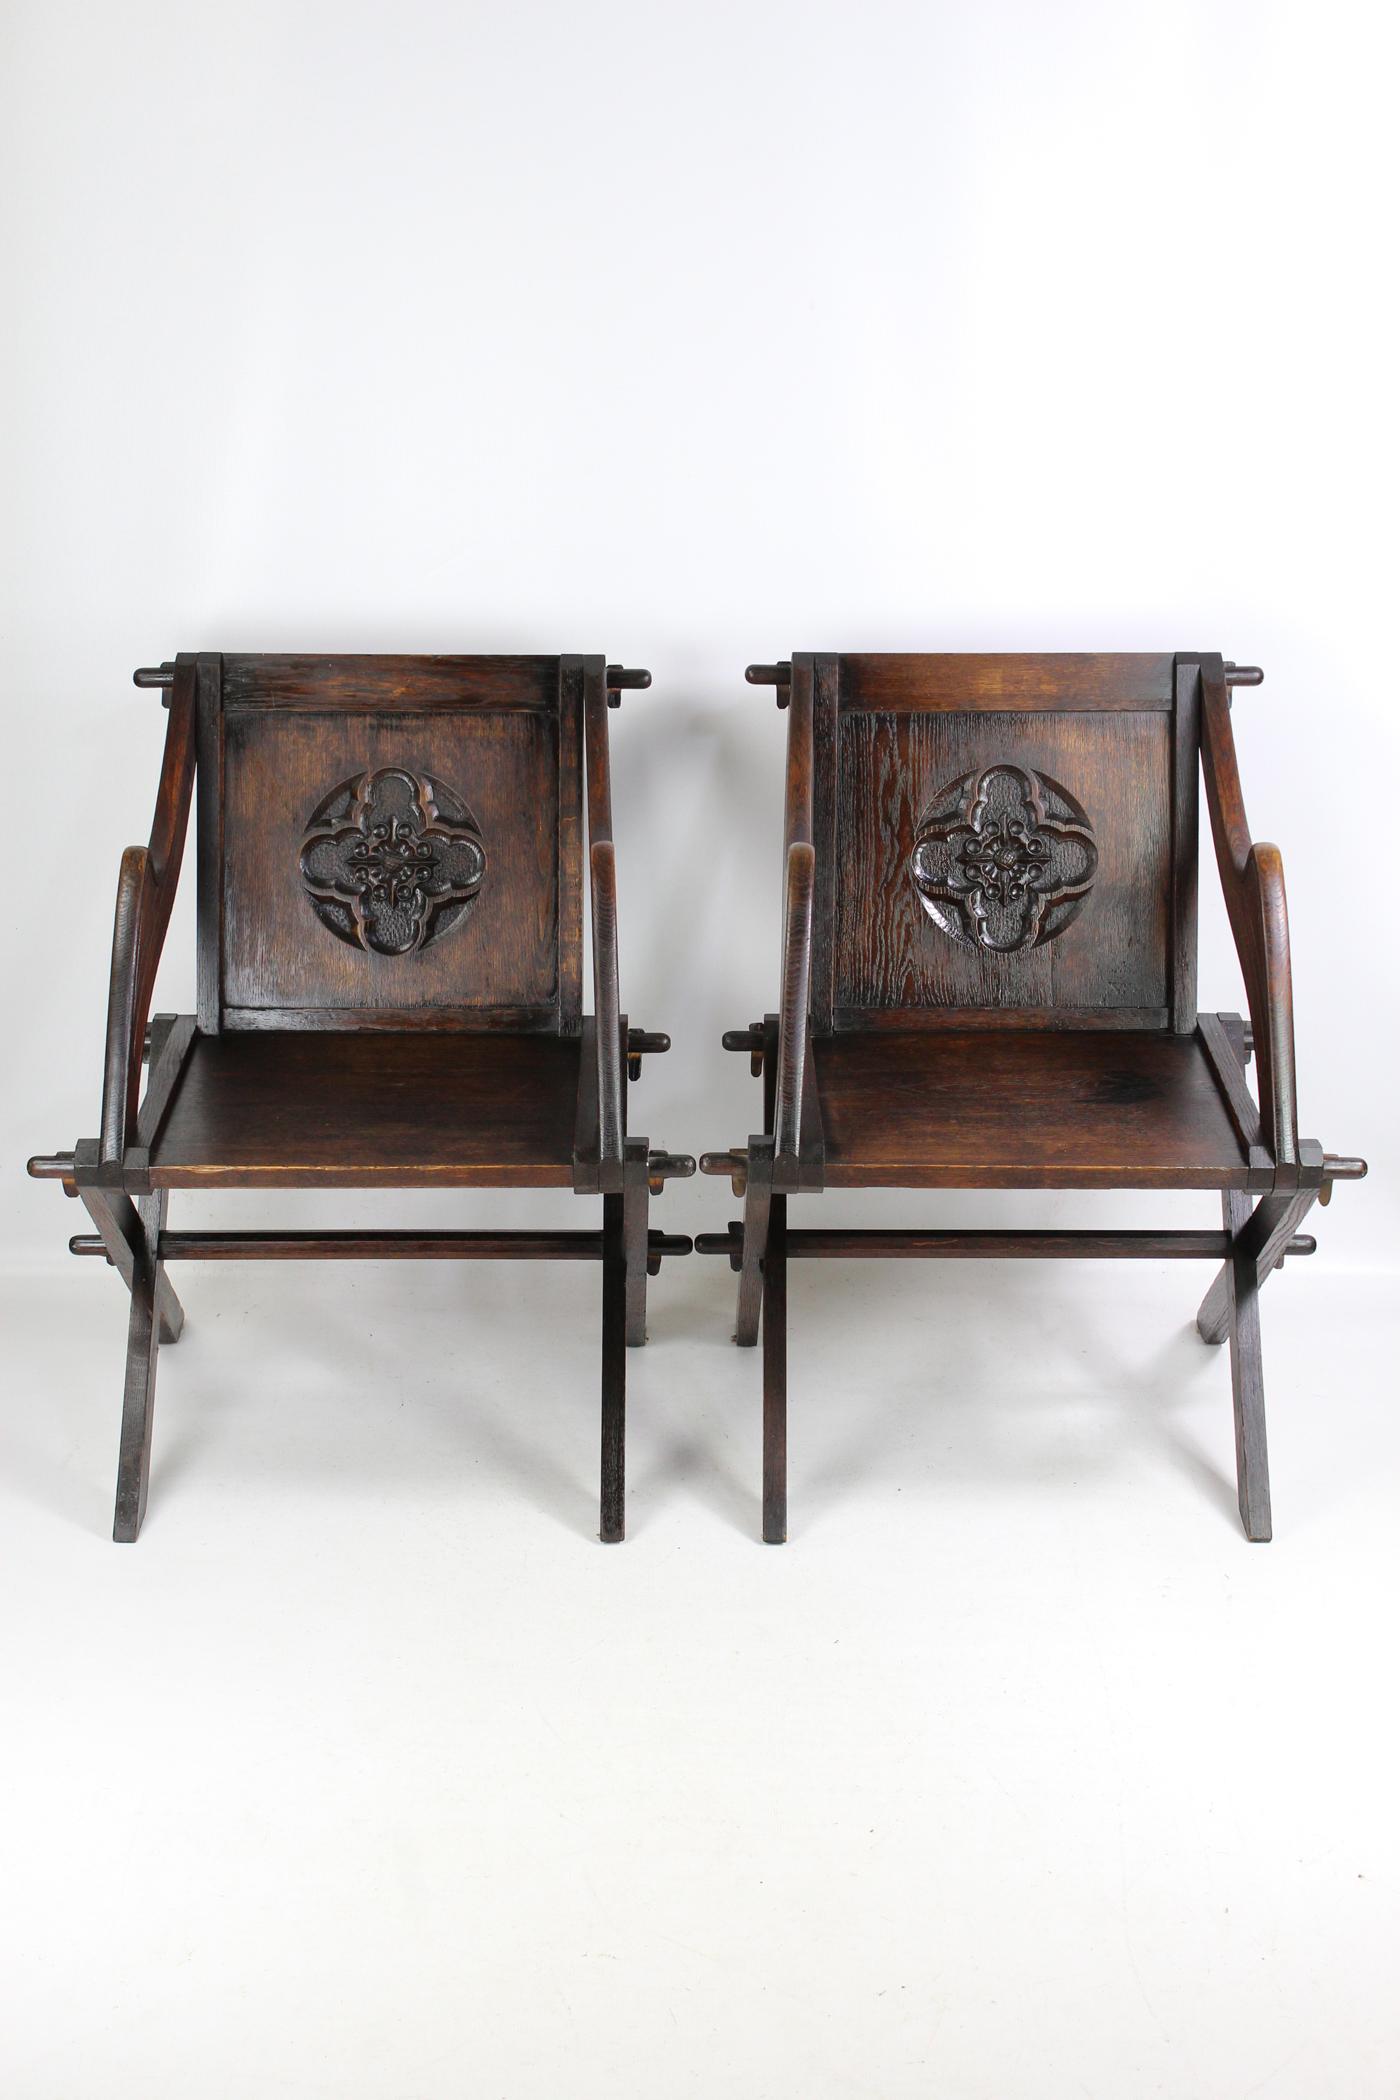 A good pair of antique early 20th century Arts & Crafts ‘Glastonbury’ armchairs dating from circa 1910. In solid oak with the distinctive shaped arms and raised on 'X' frame legs united by centre point stretcher, the backrests decorated with relief